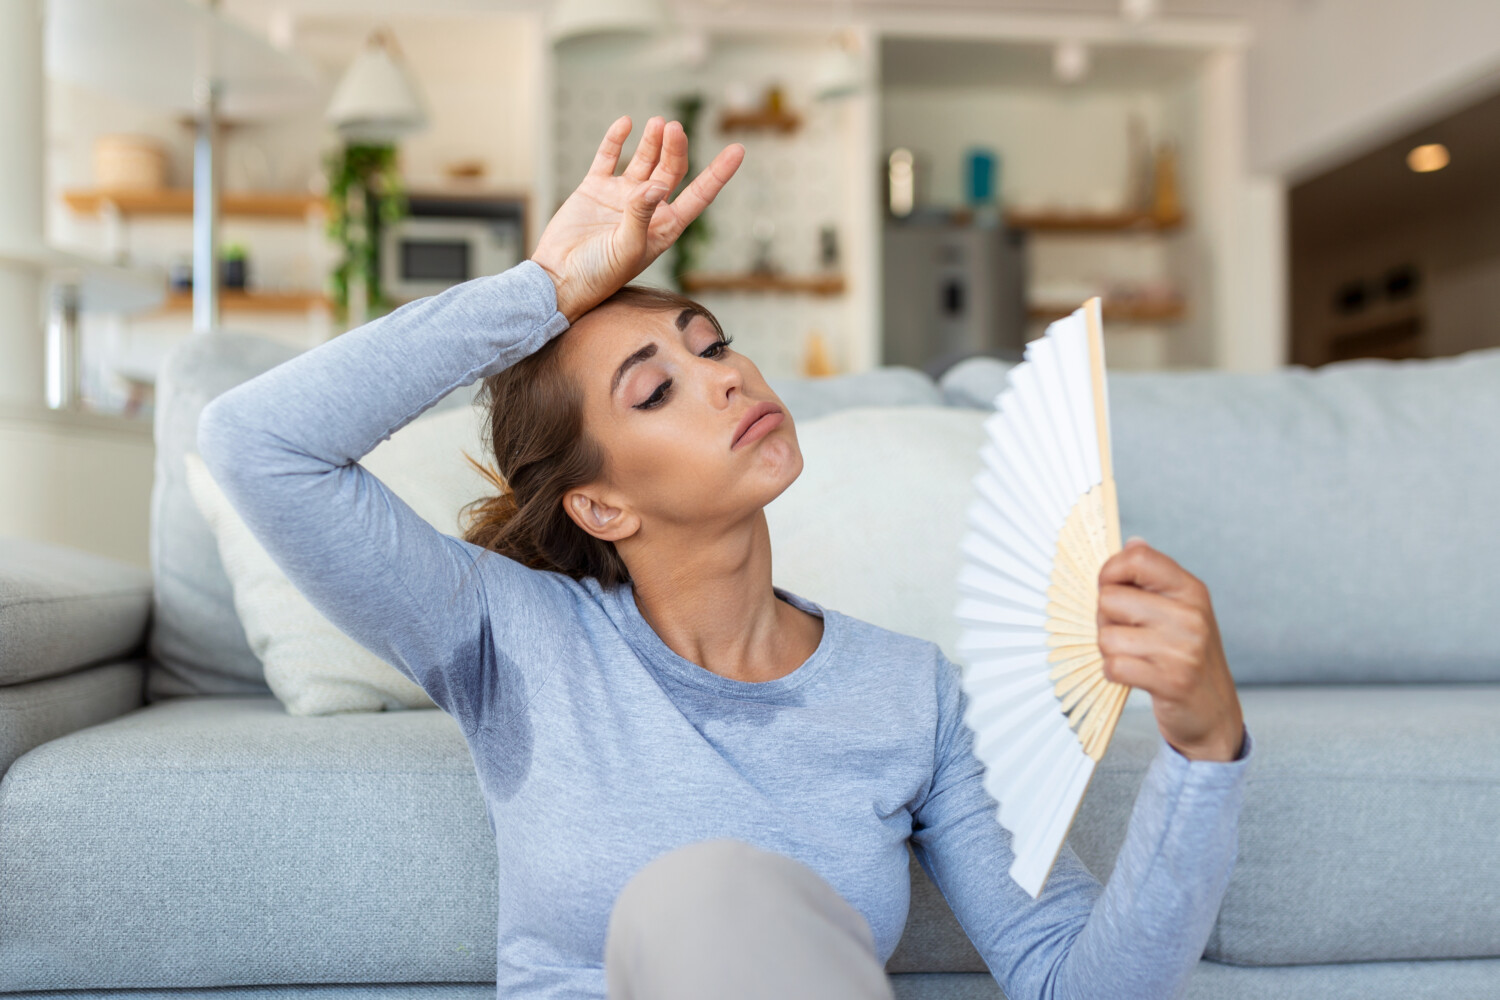 6 ways to cool down a room without air conditioning